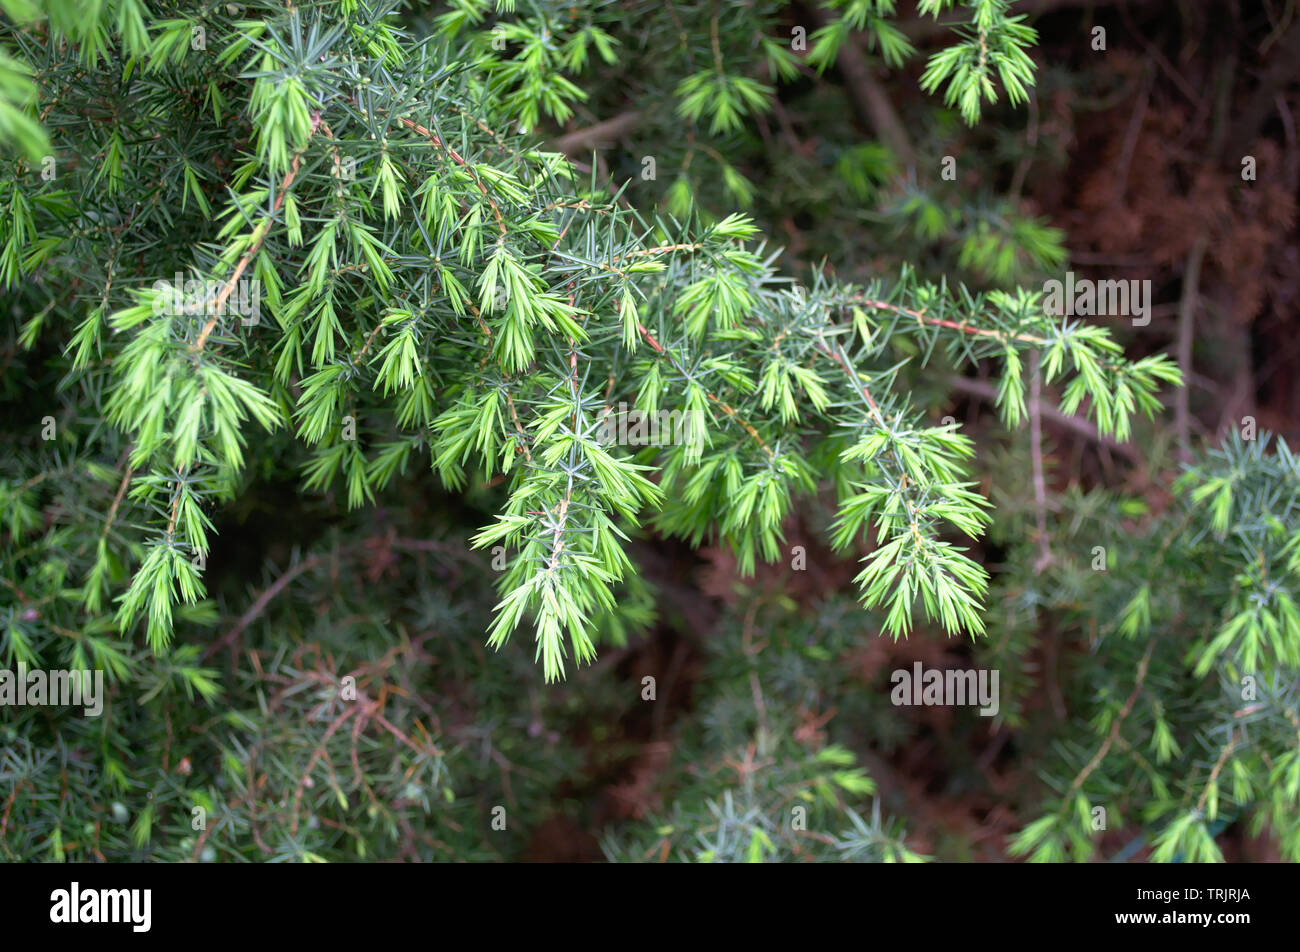 Young green evergreen needles of a fir tree Tsuga canadensis. Slender, evergreen pine family tree. Close-up Stock Photo